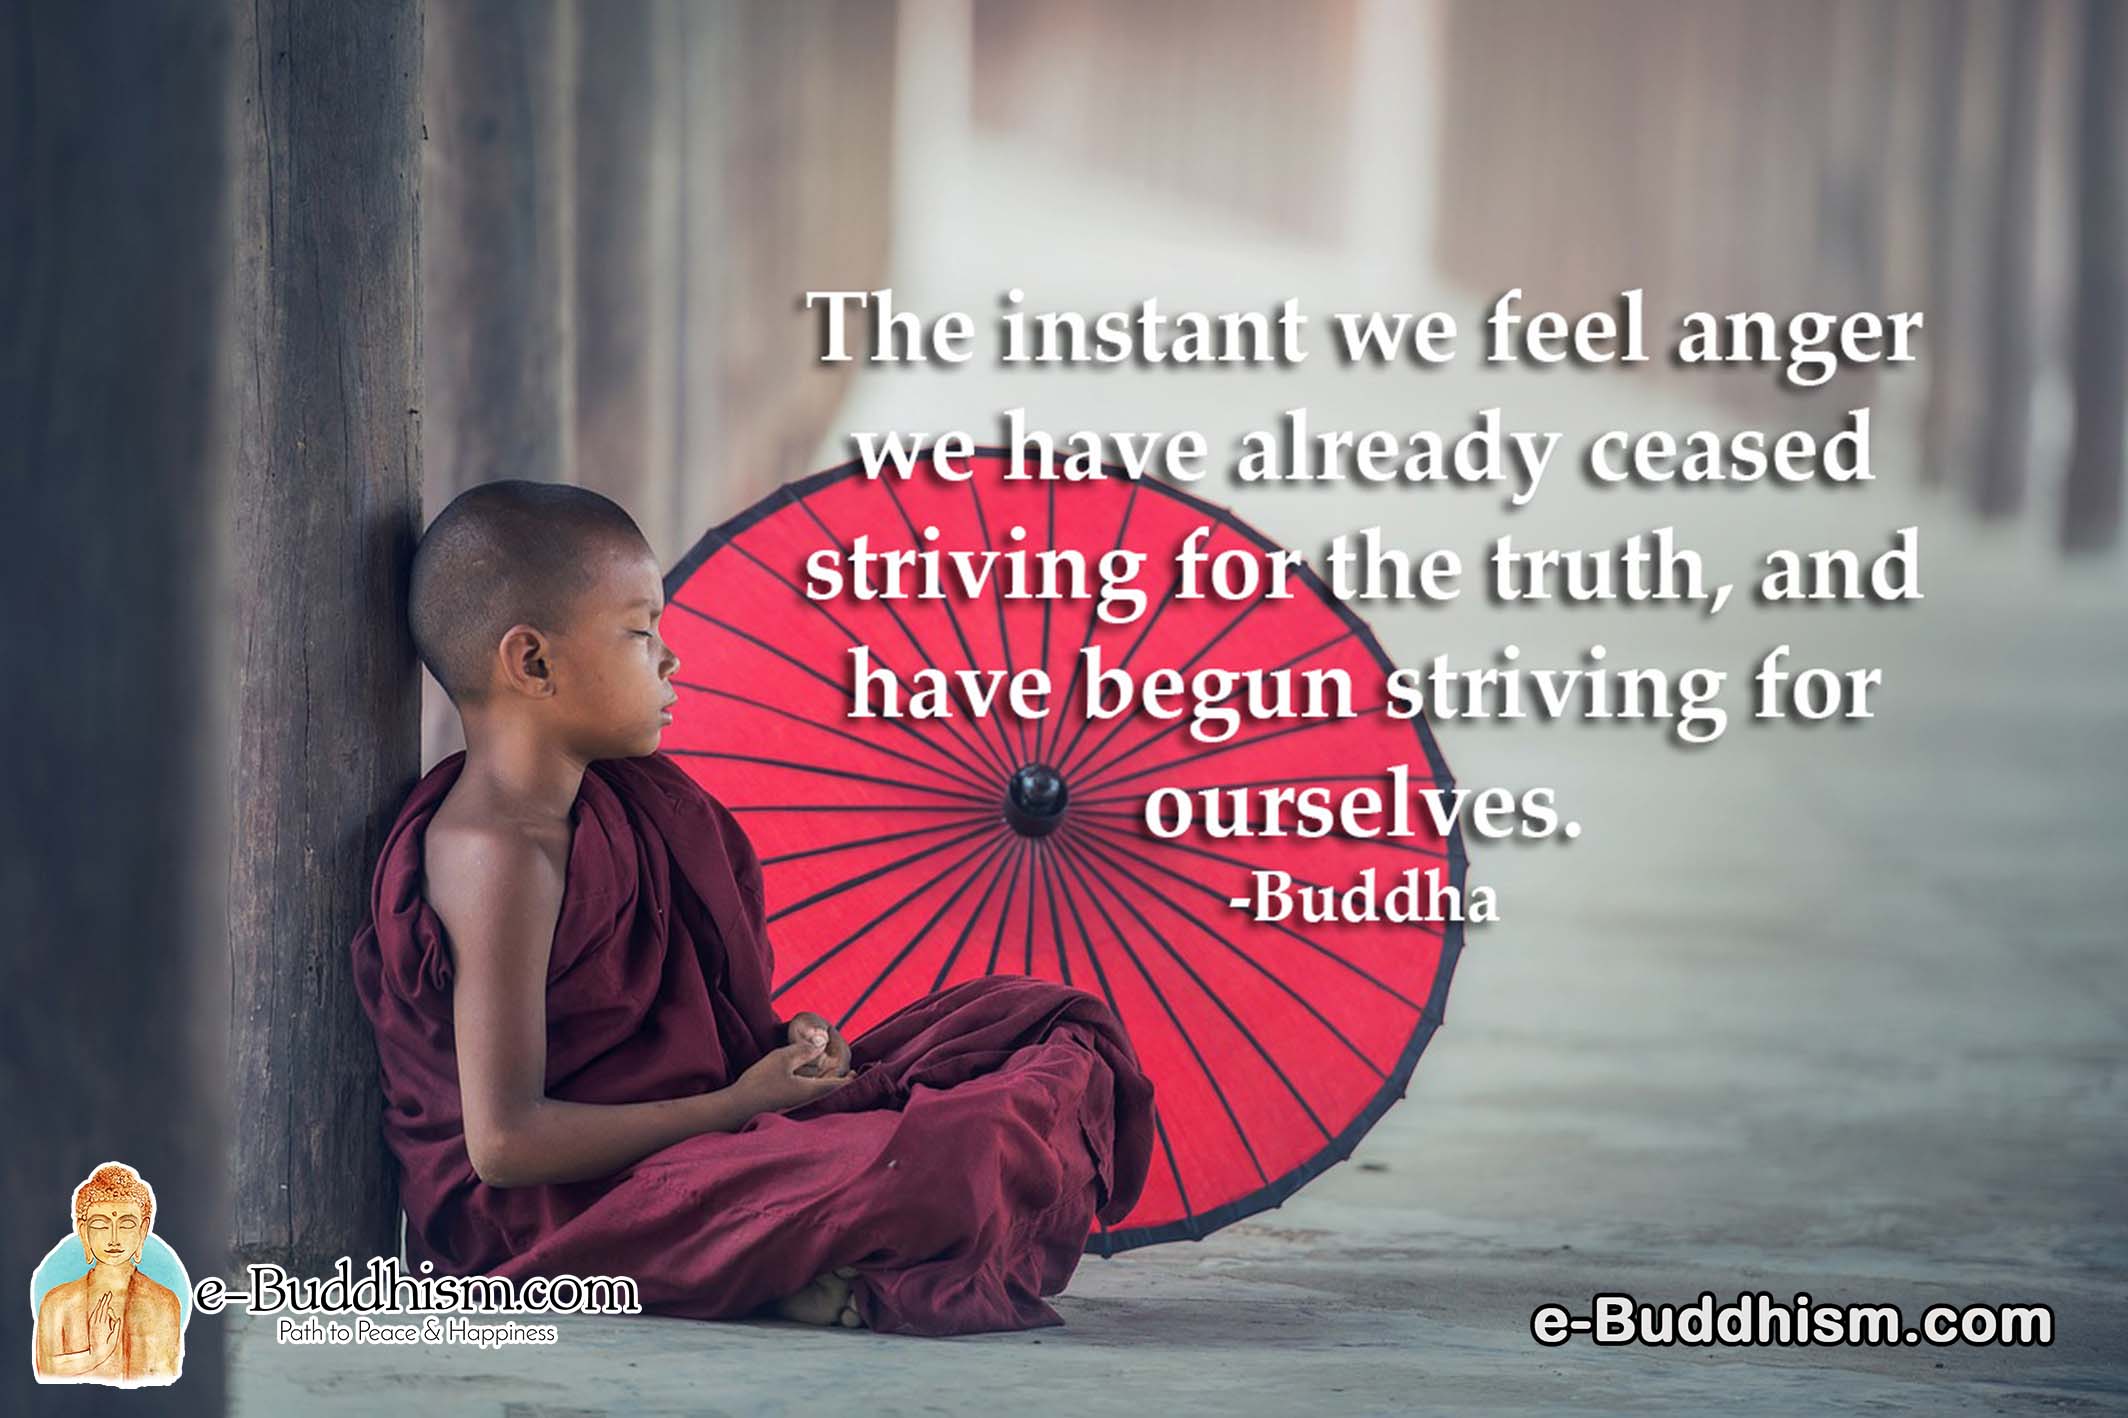 The instant we feel anger we have already ceased striving for the truth, and have begun striving for ourselves. -Buddha